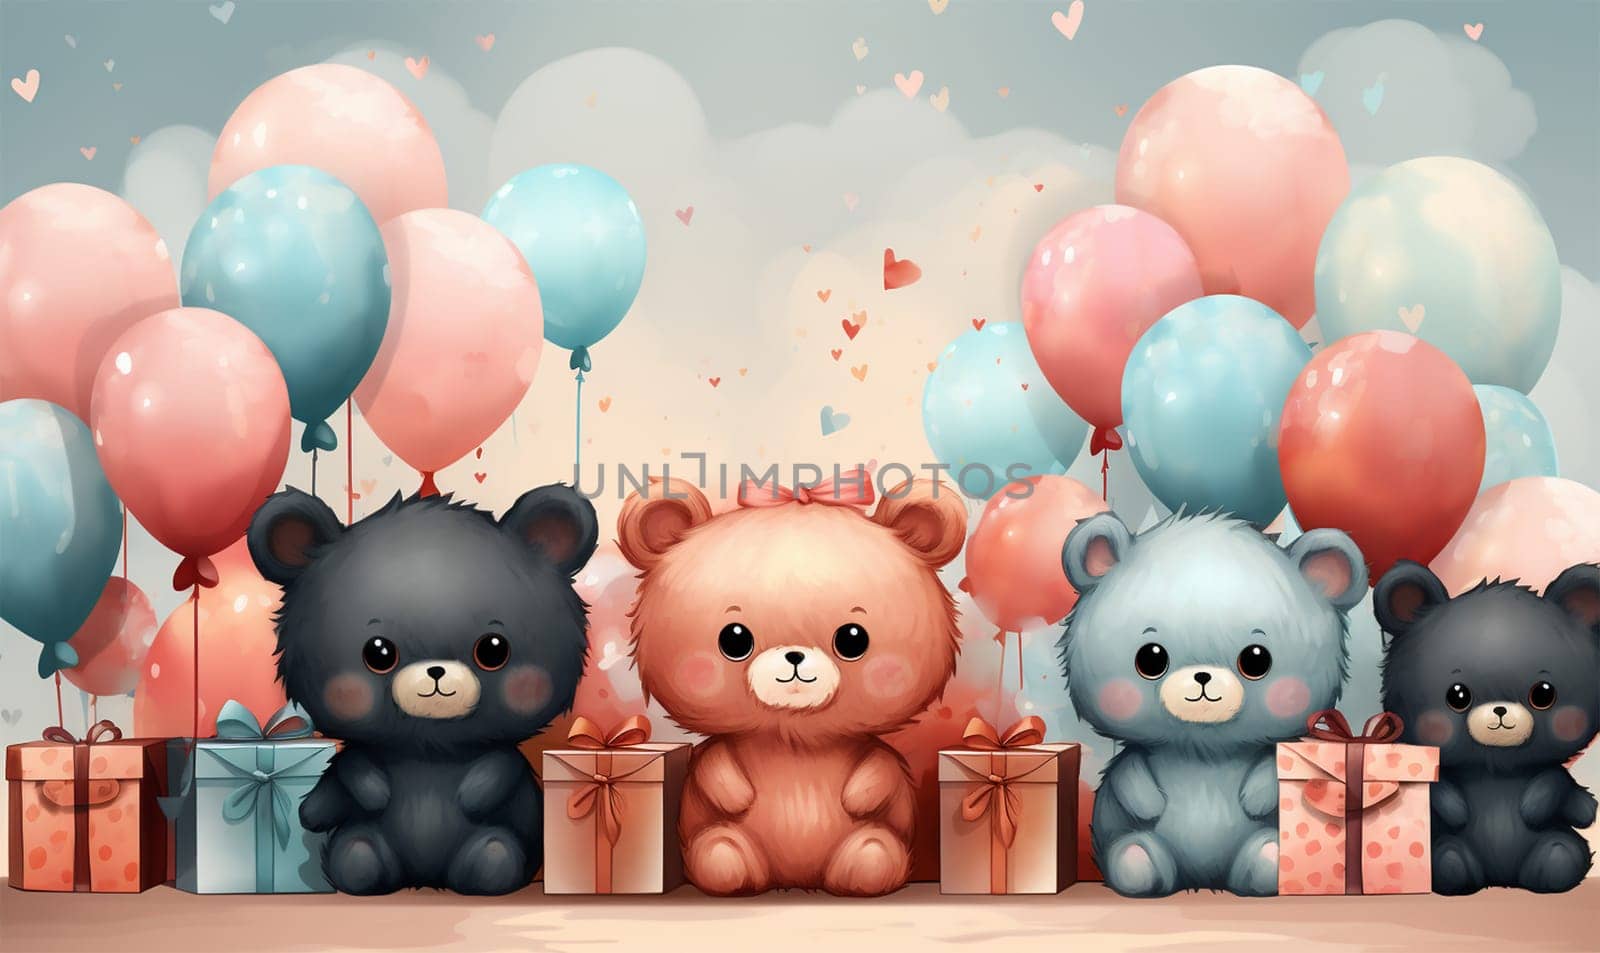 Cute birthday card. Happy birthday greeting card and party invitation. Colored illustration. Balloons,present,gift box and confetti. Adorable design for children Copy space